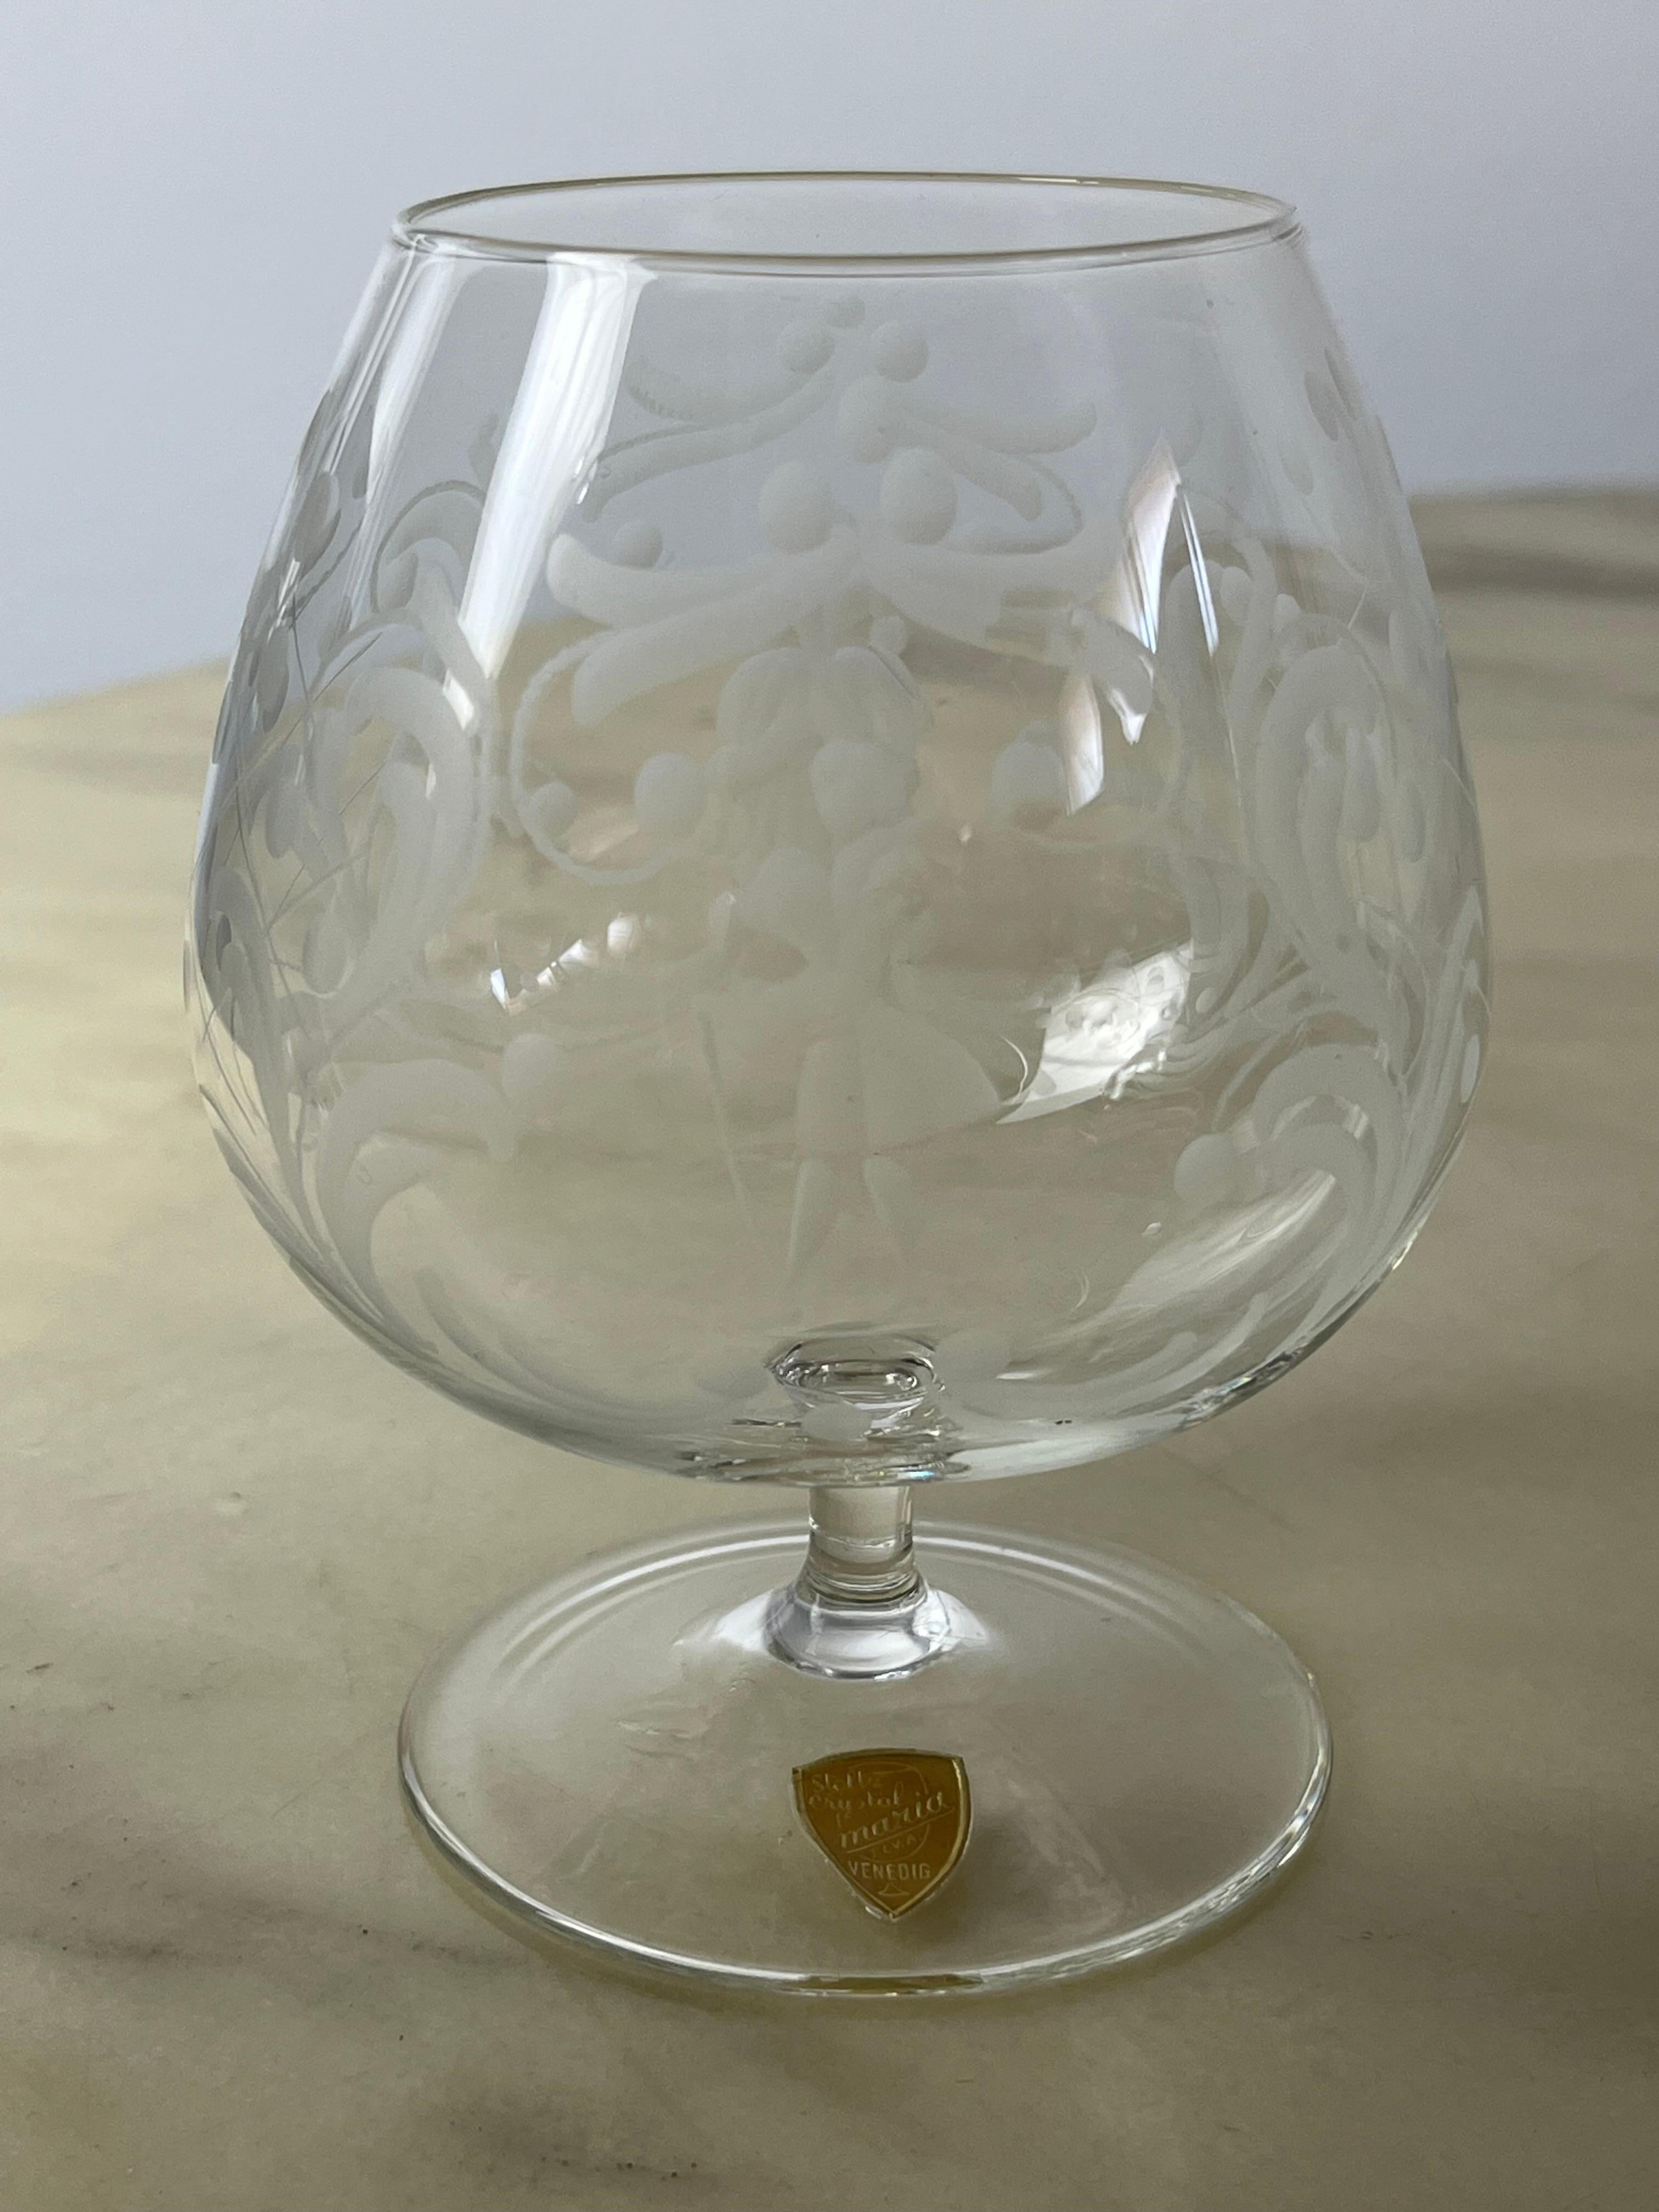 Italian Six Cognac Glasses in Hand-Engraved Crystal, Venice, 1960s For Sale